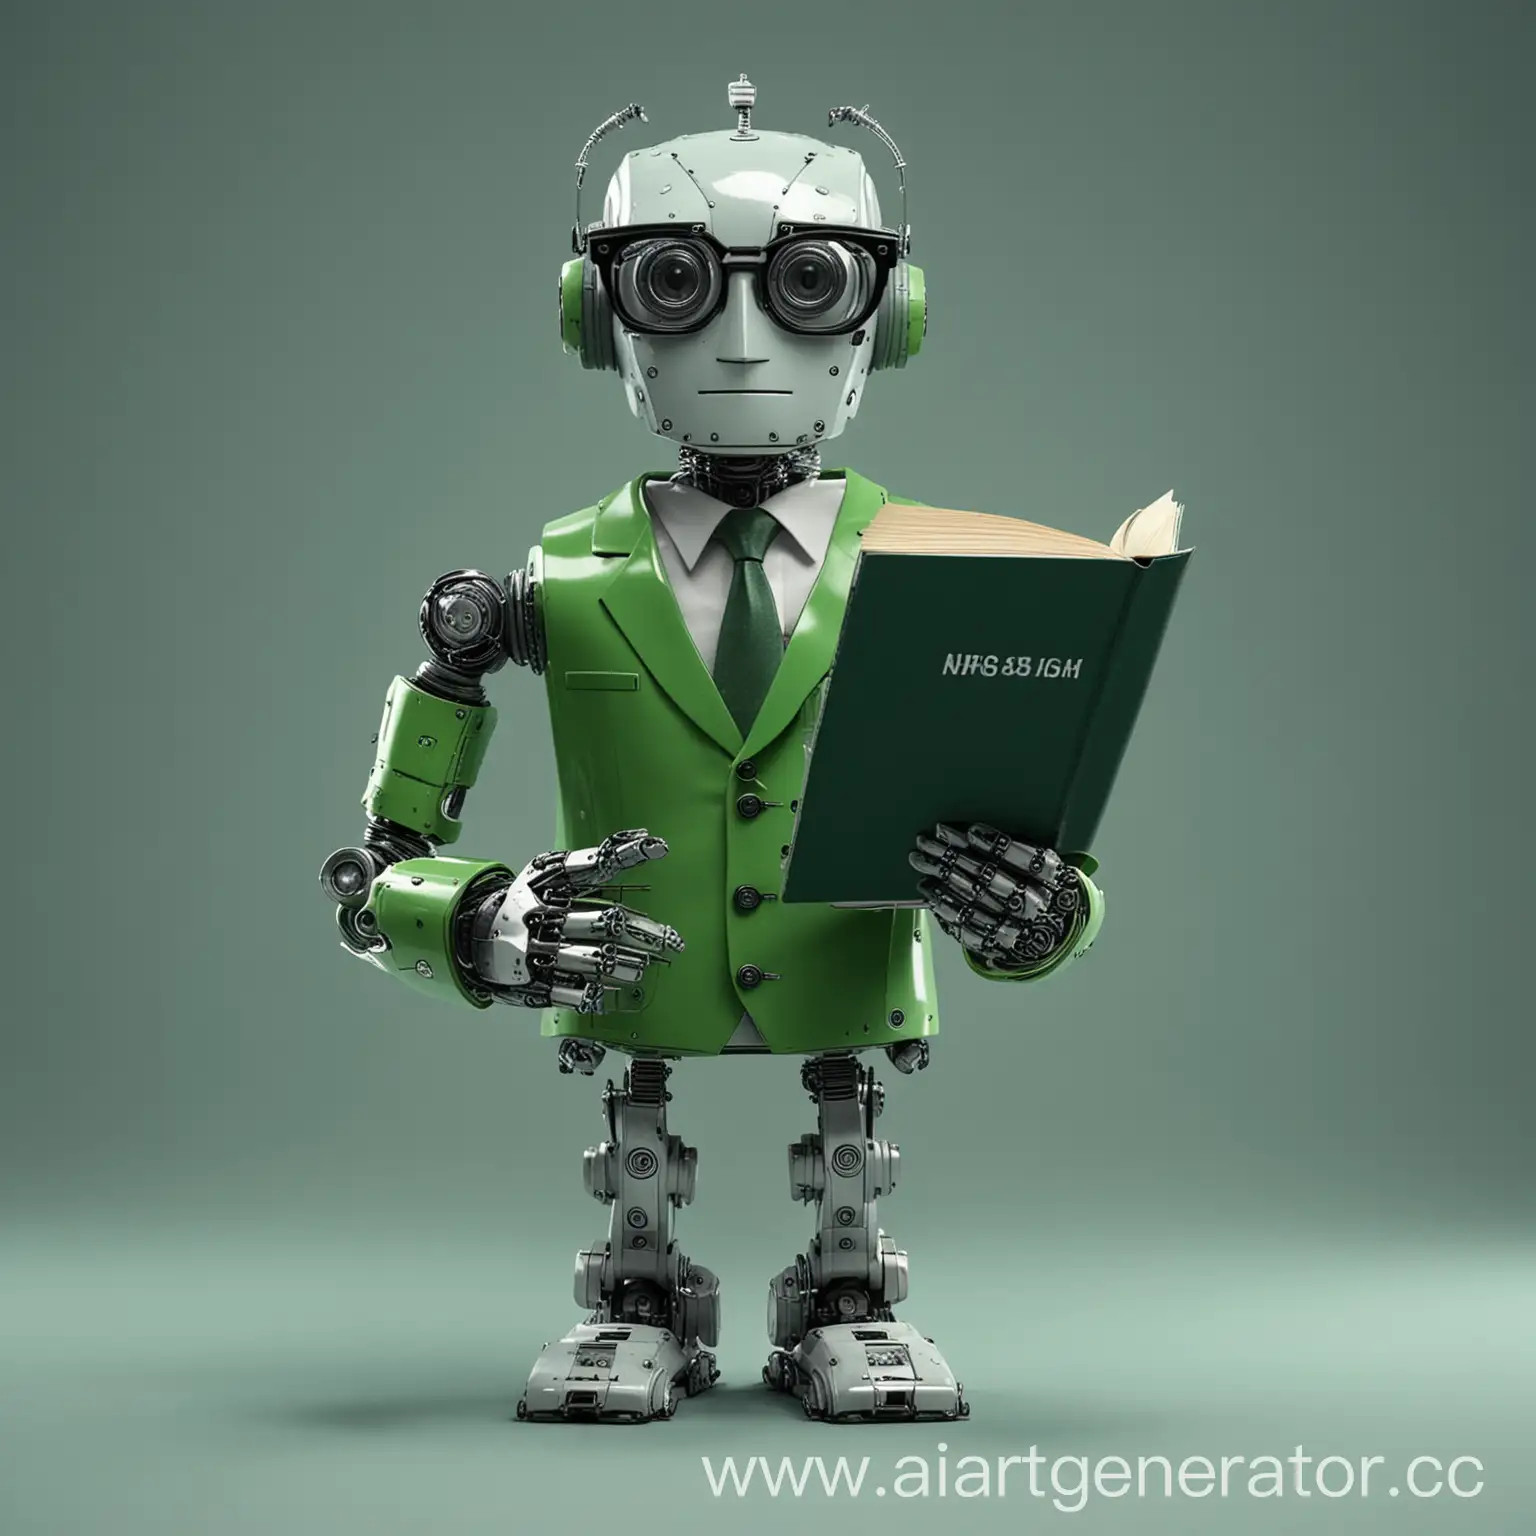 Stylish-Robot-Scholar-with-Textbook-and-Watch